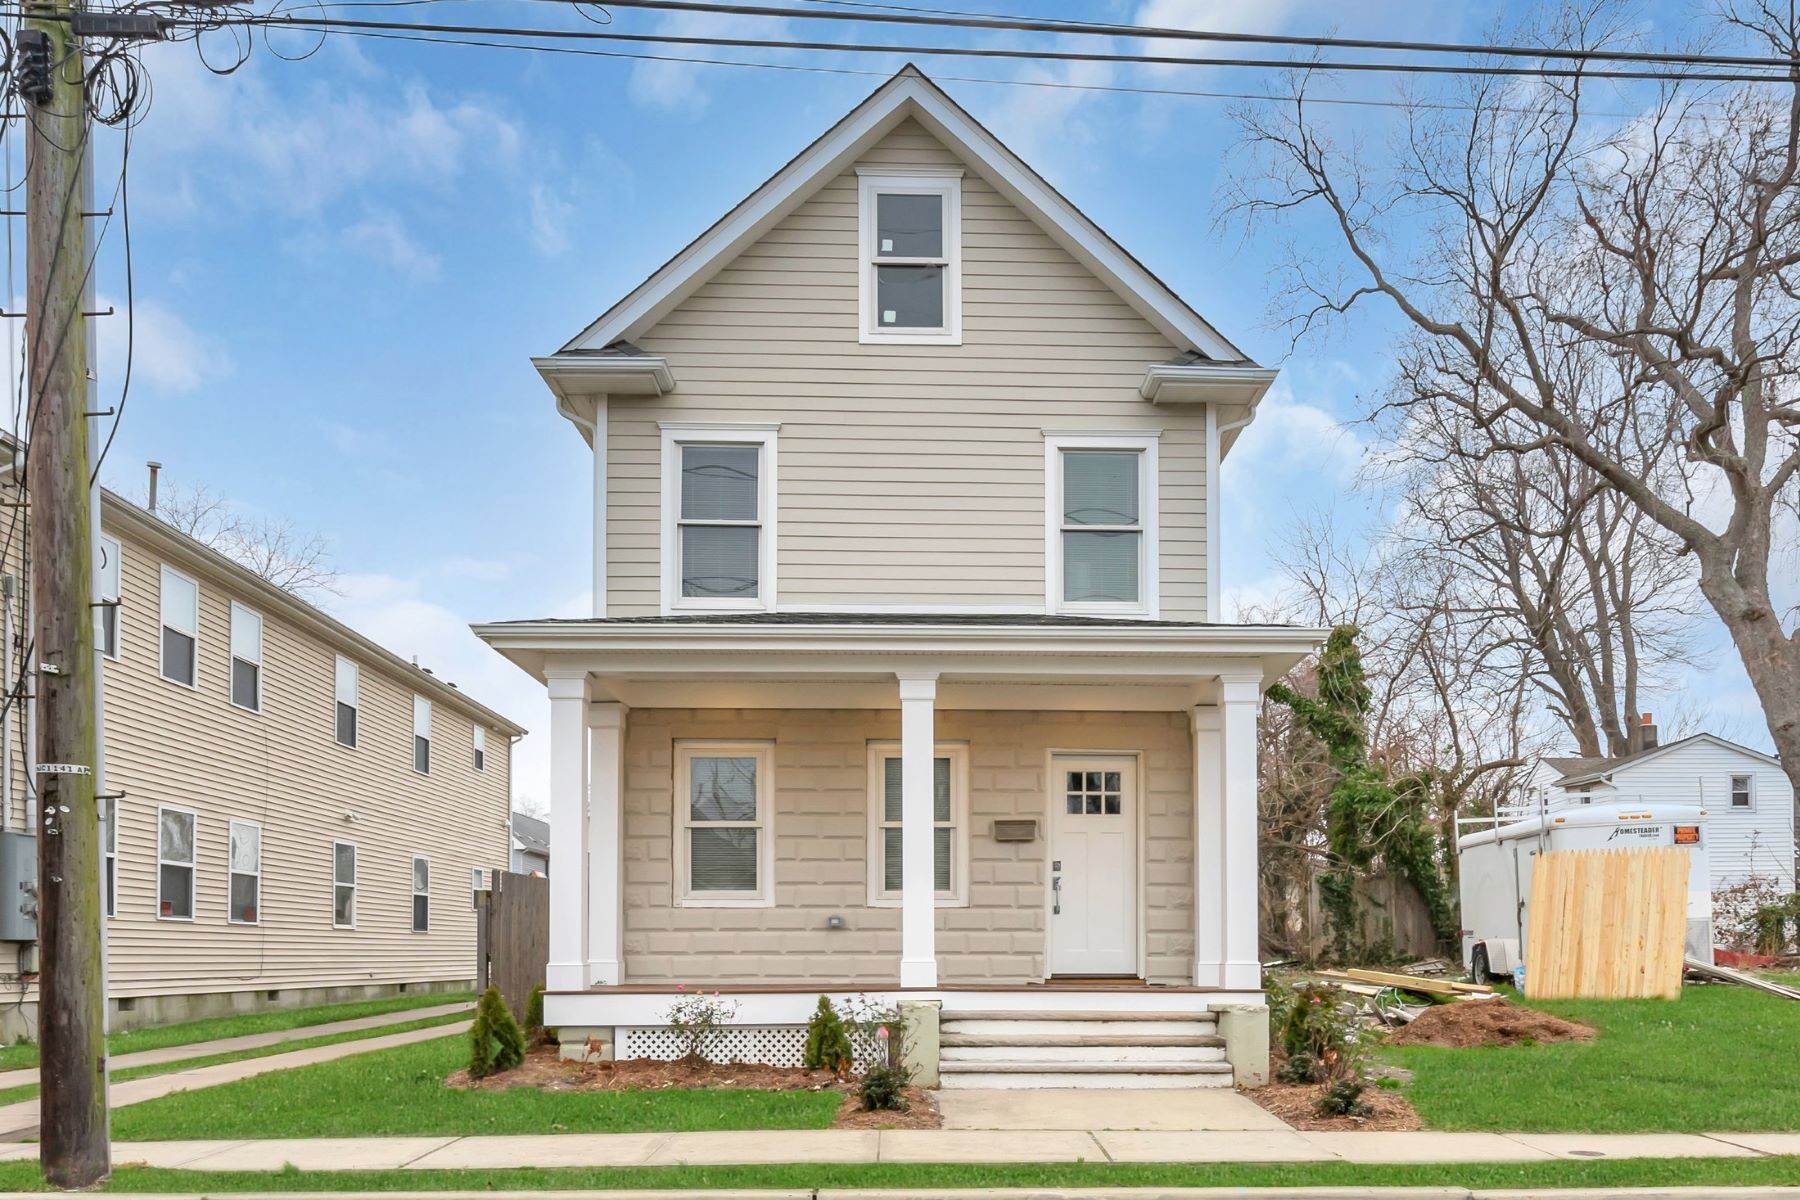 2. Single Family Homes for Sale at Asbury Park Colonial 39 Borden Avenue Asbury Park, New Jersey 07712 United States